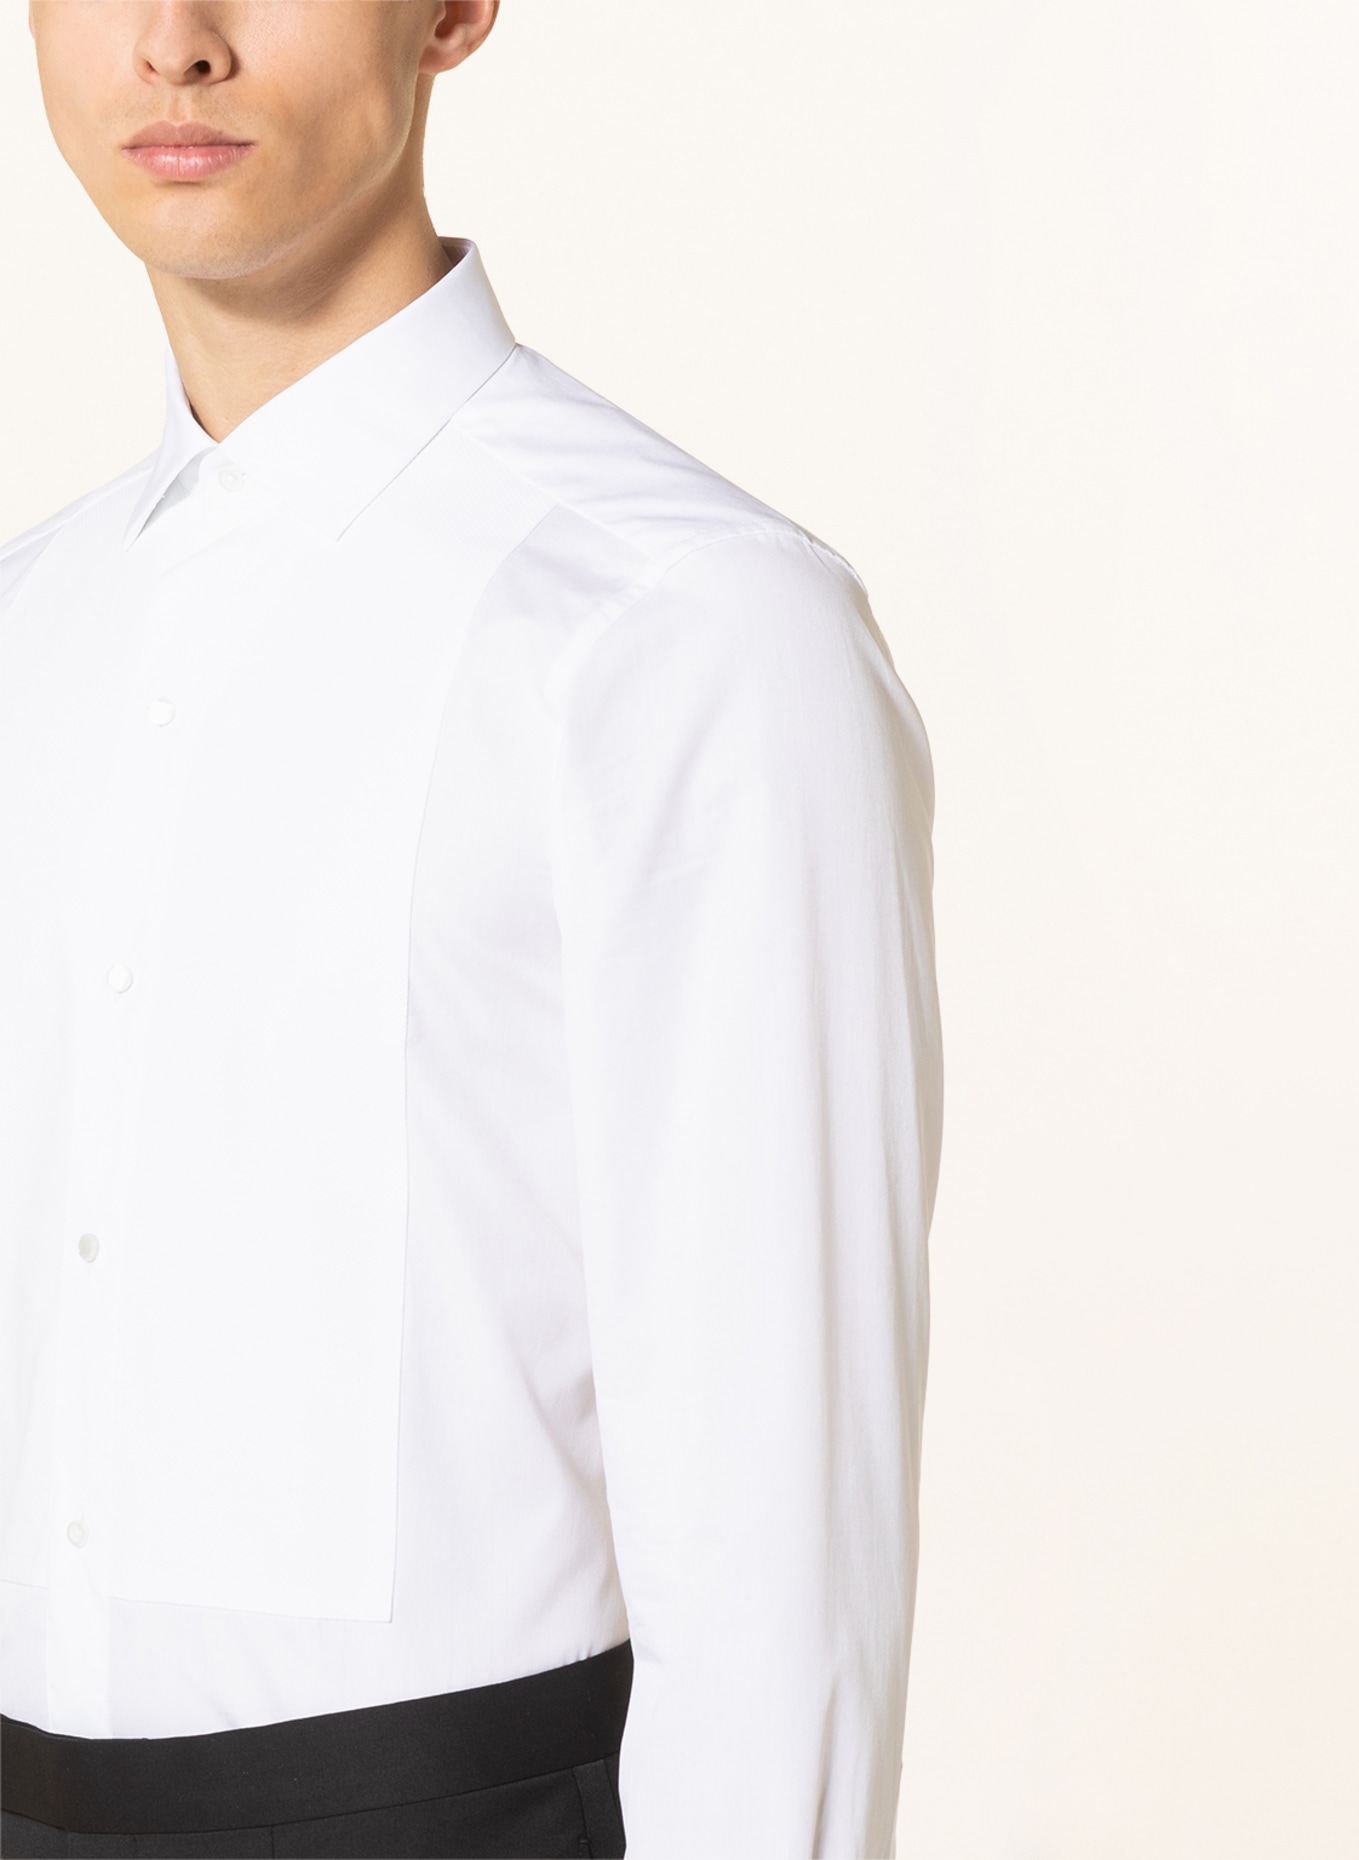 ZEGNA Tuxedo shirt regular fit with French cuffs, Color: WHITE (Image 4)